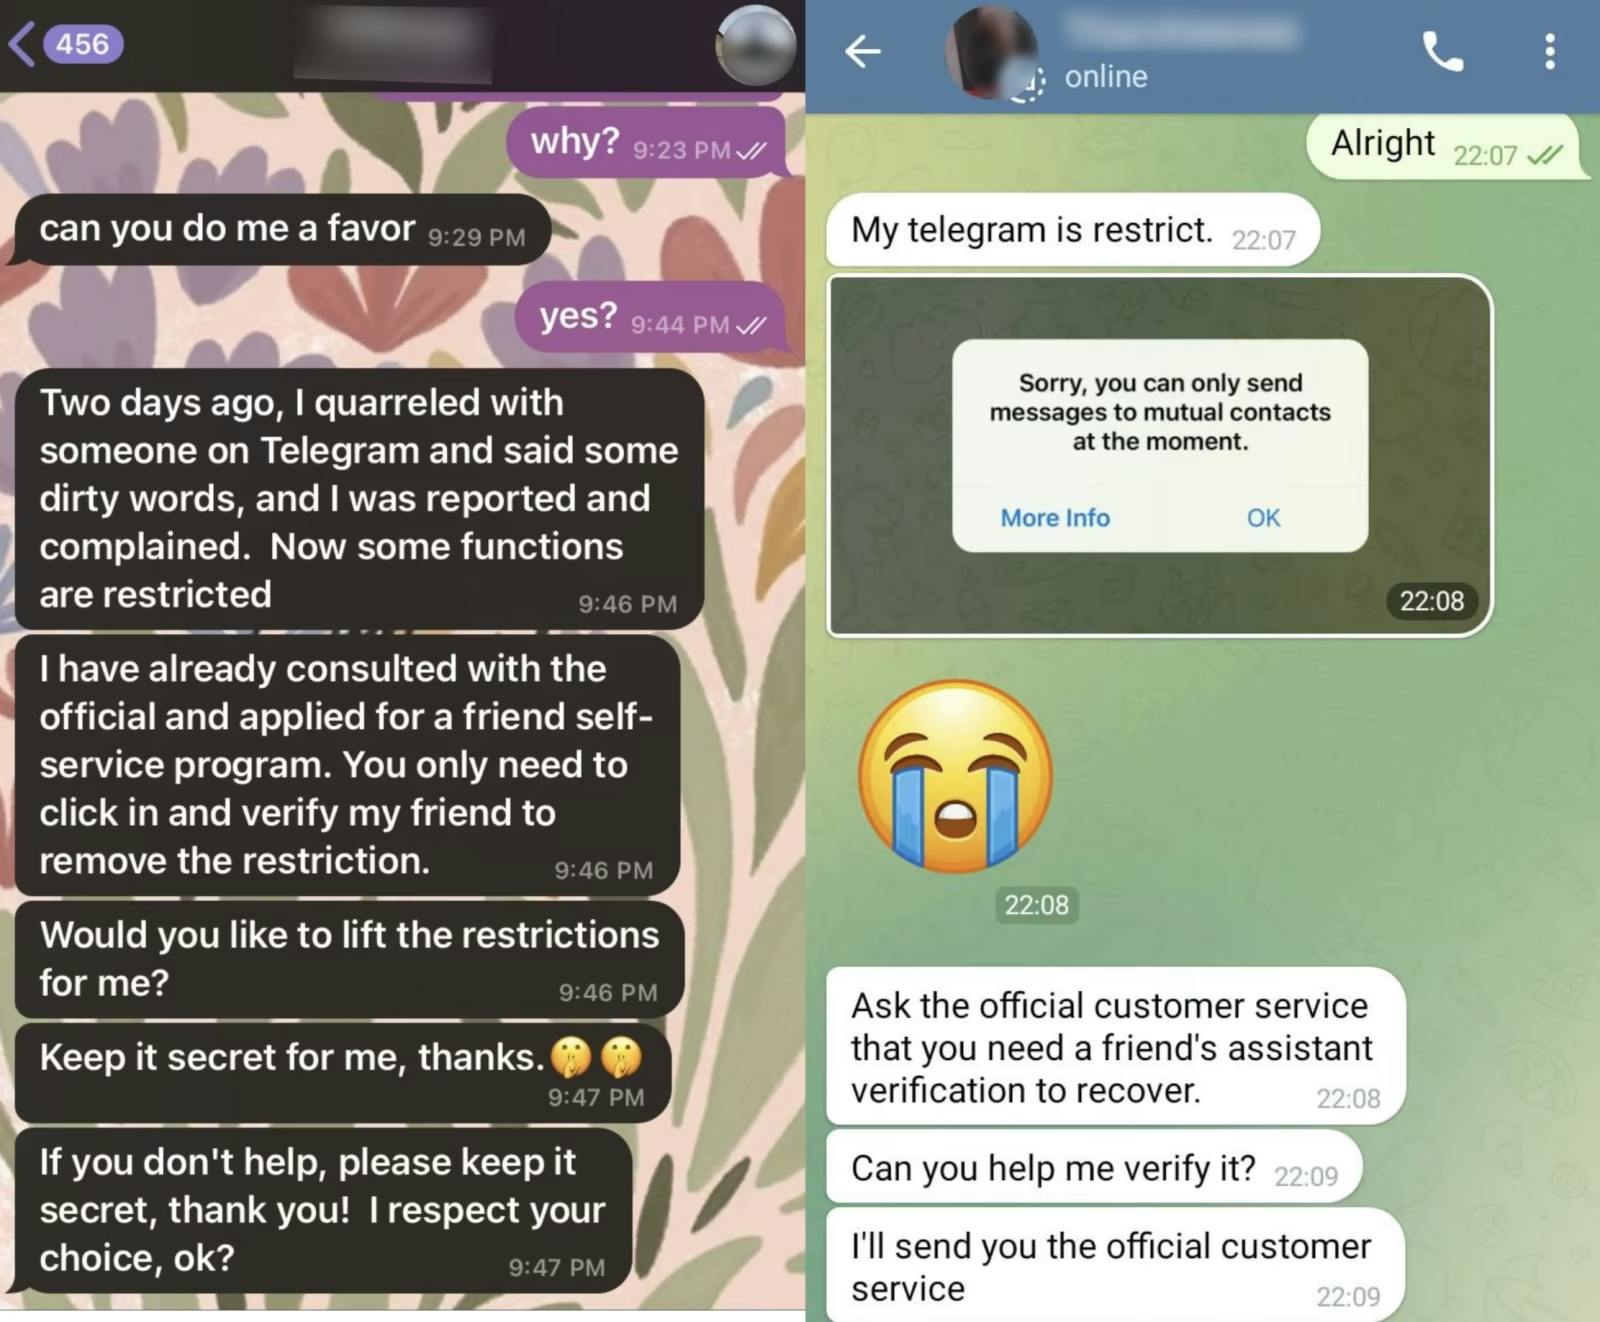 Unmasking Telegram Scams: How to Recognize and Protect Yourself